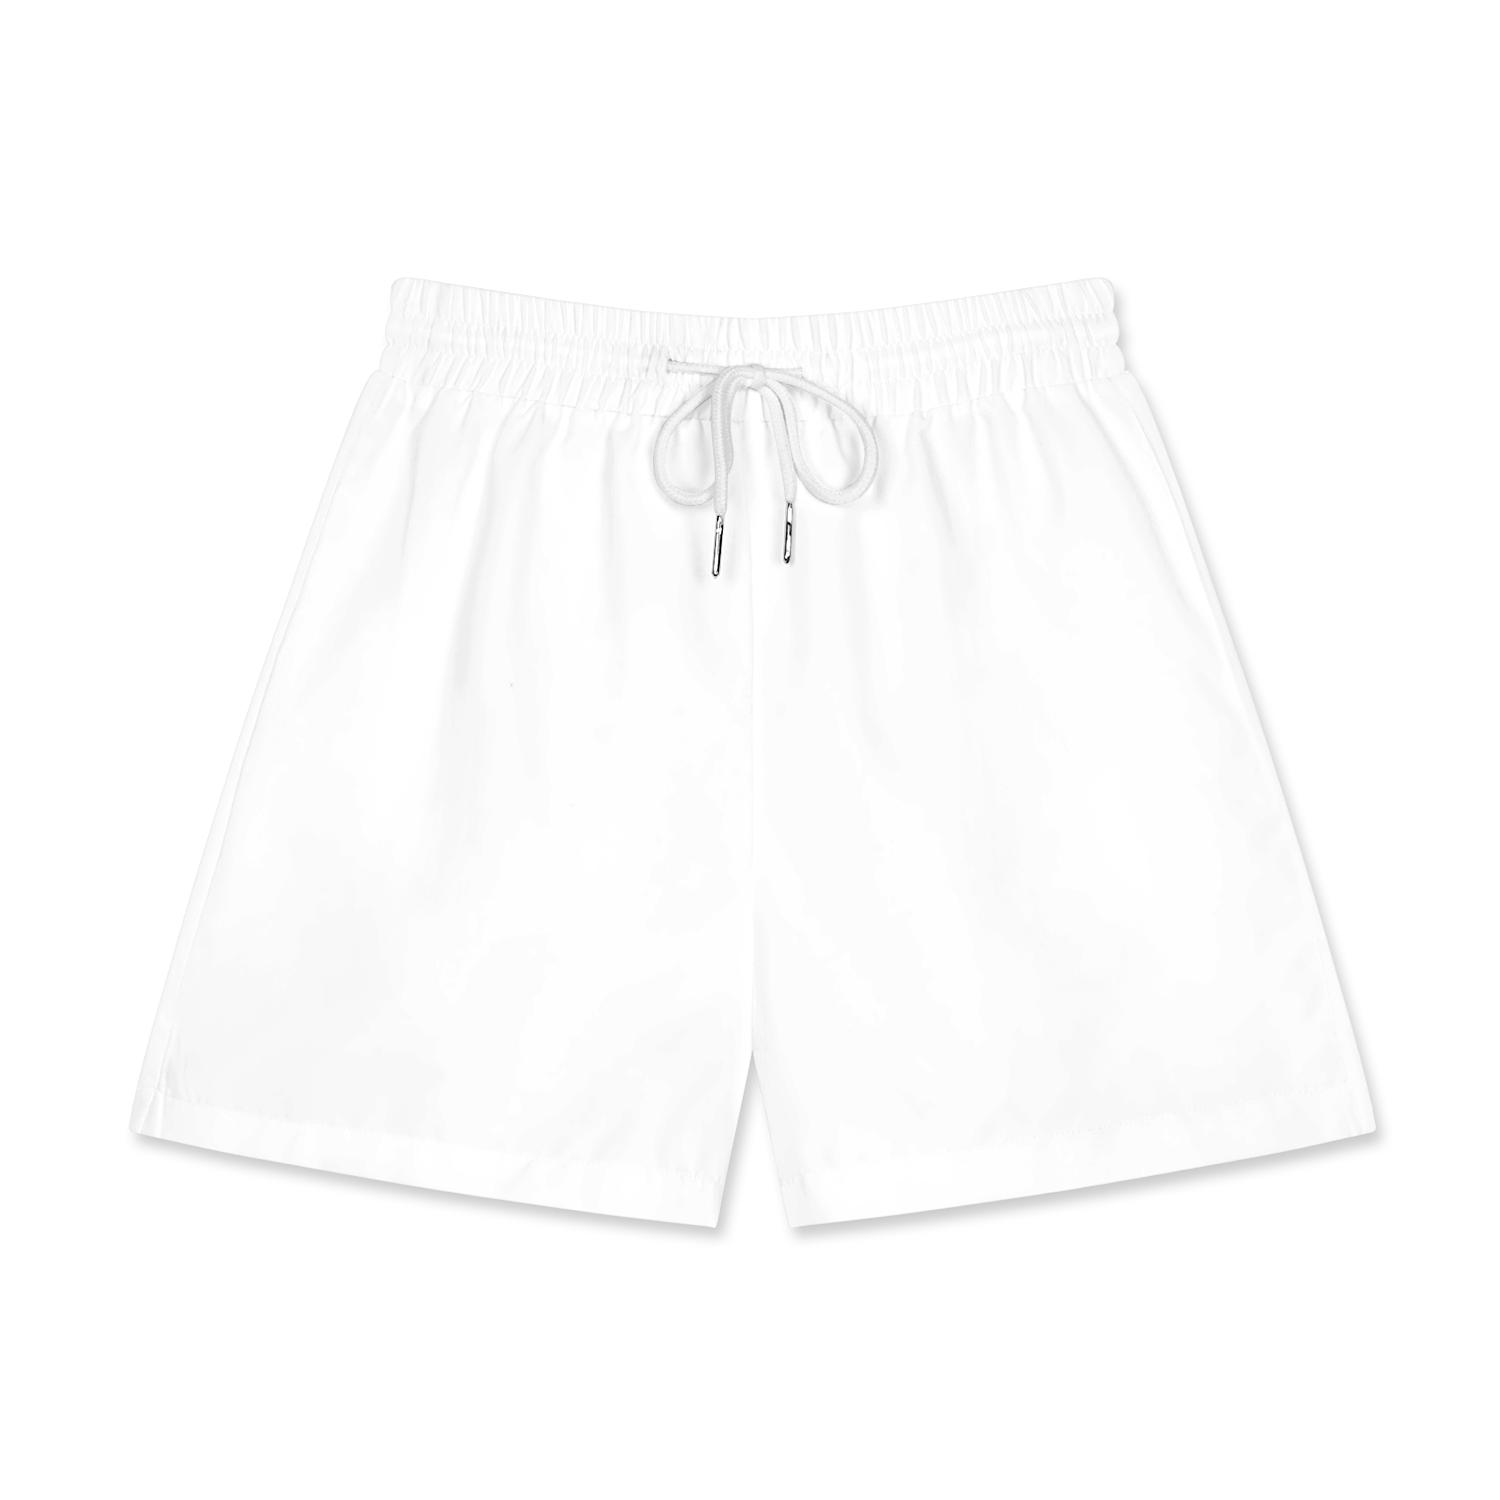 All-Over Print Women's Athletic Shorts - Print On Demand | HugePOD-2